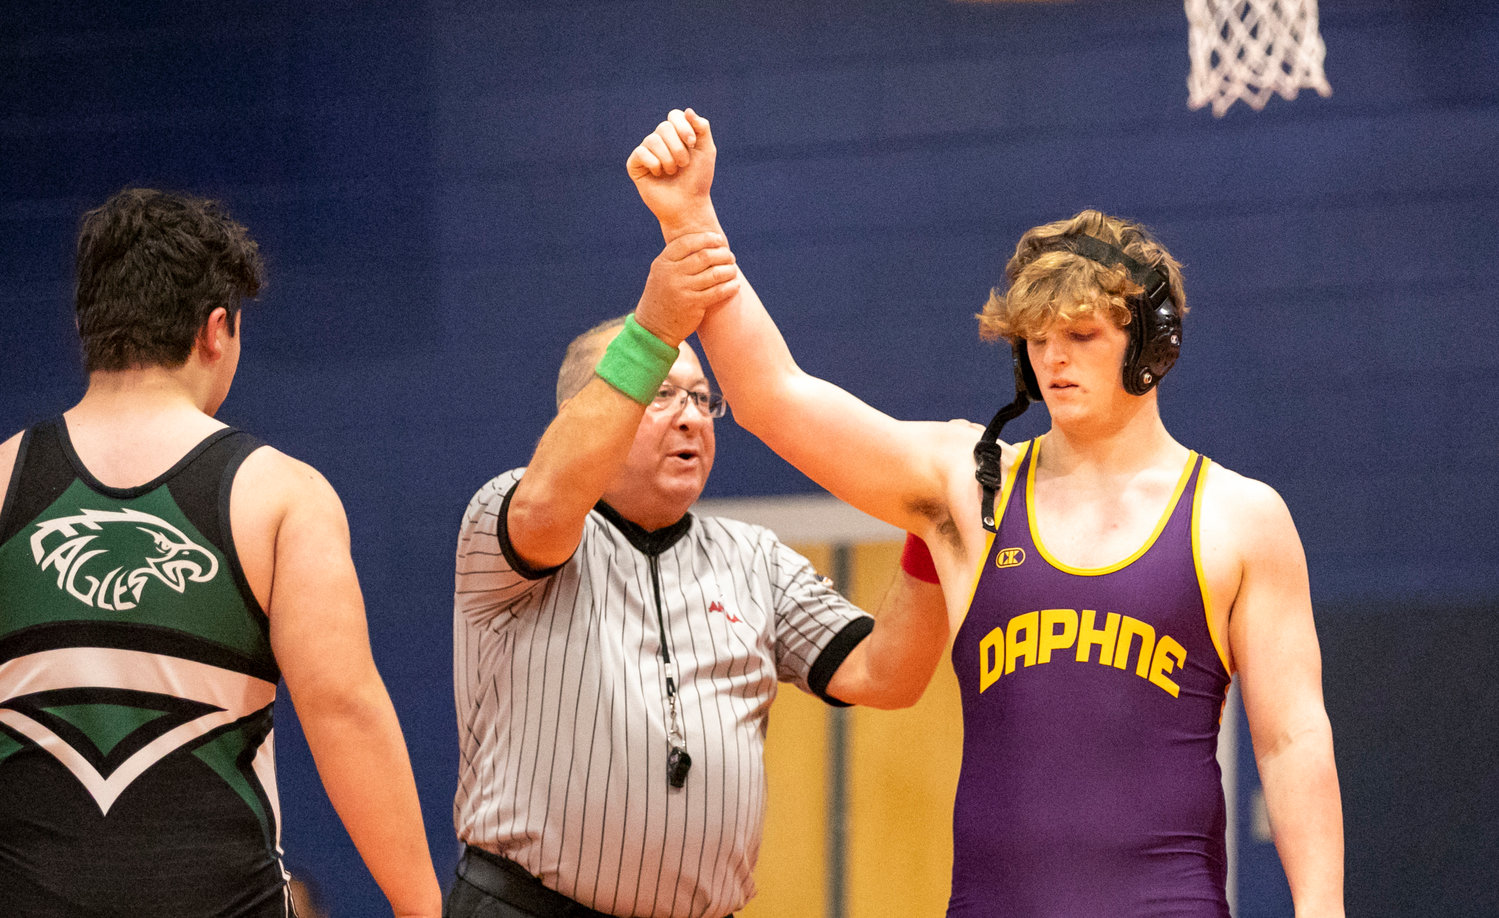 Daphne sophomore Colton Rainer claims victory in the quarterfinals of the 220-pound class at the Baldwin County Championship meet in Gulf Shores Friday, Jan. 6. Rainer was one of four individual champions to help the Trojans finish as team runners-up.